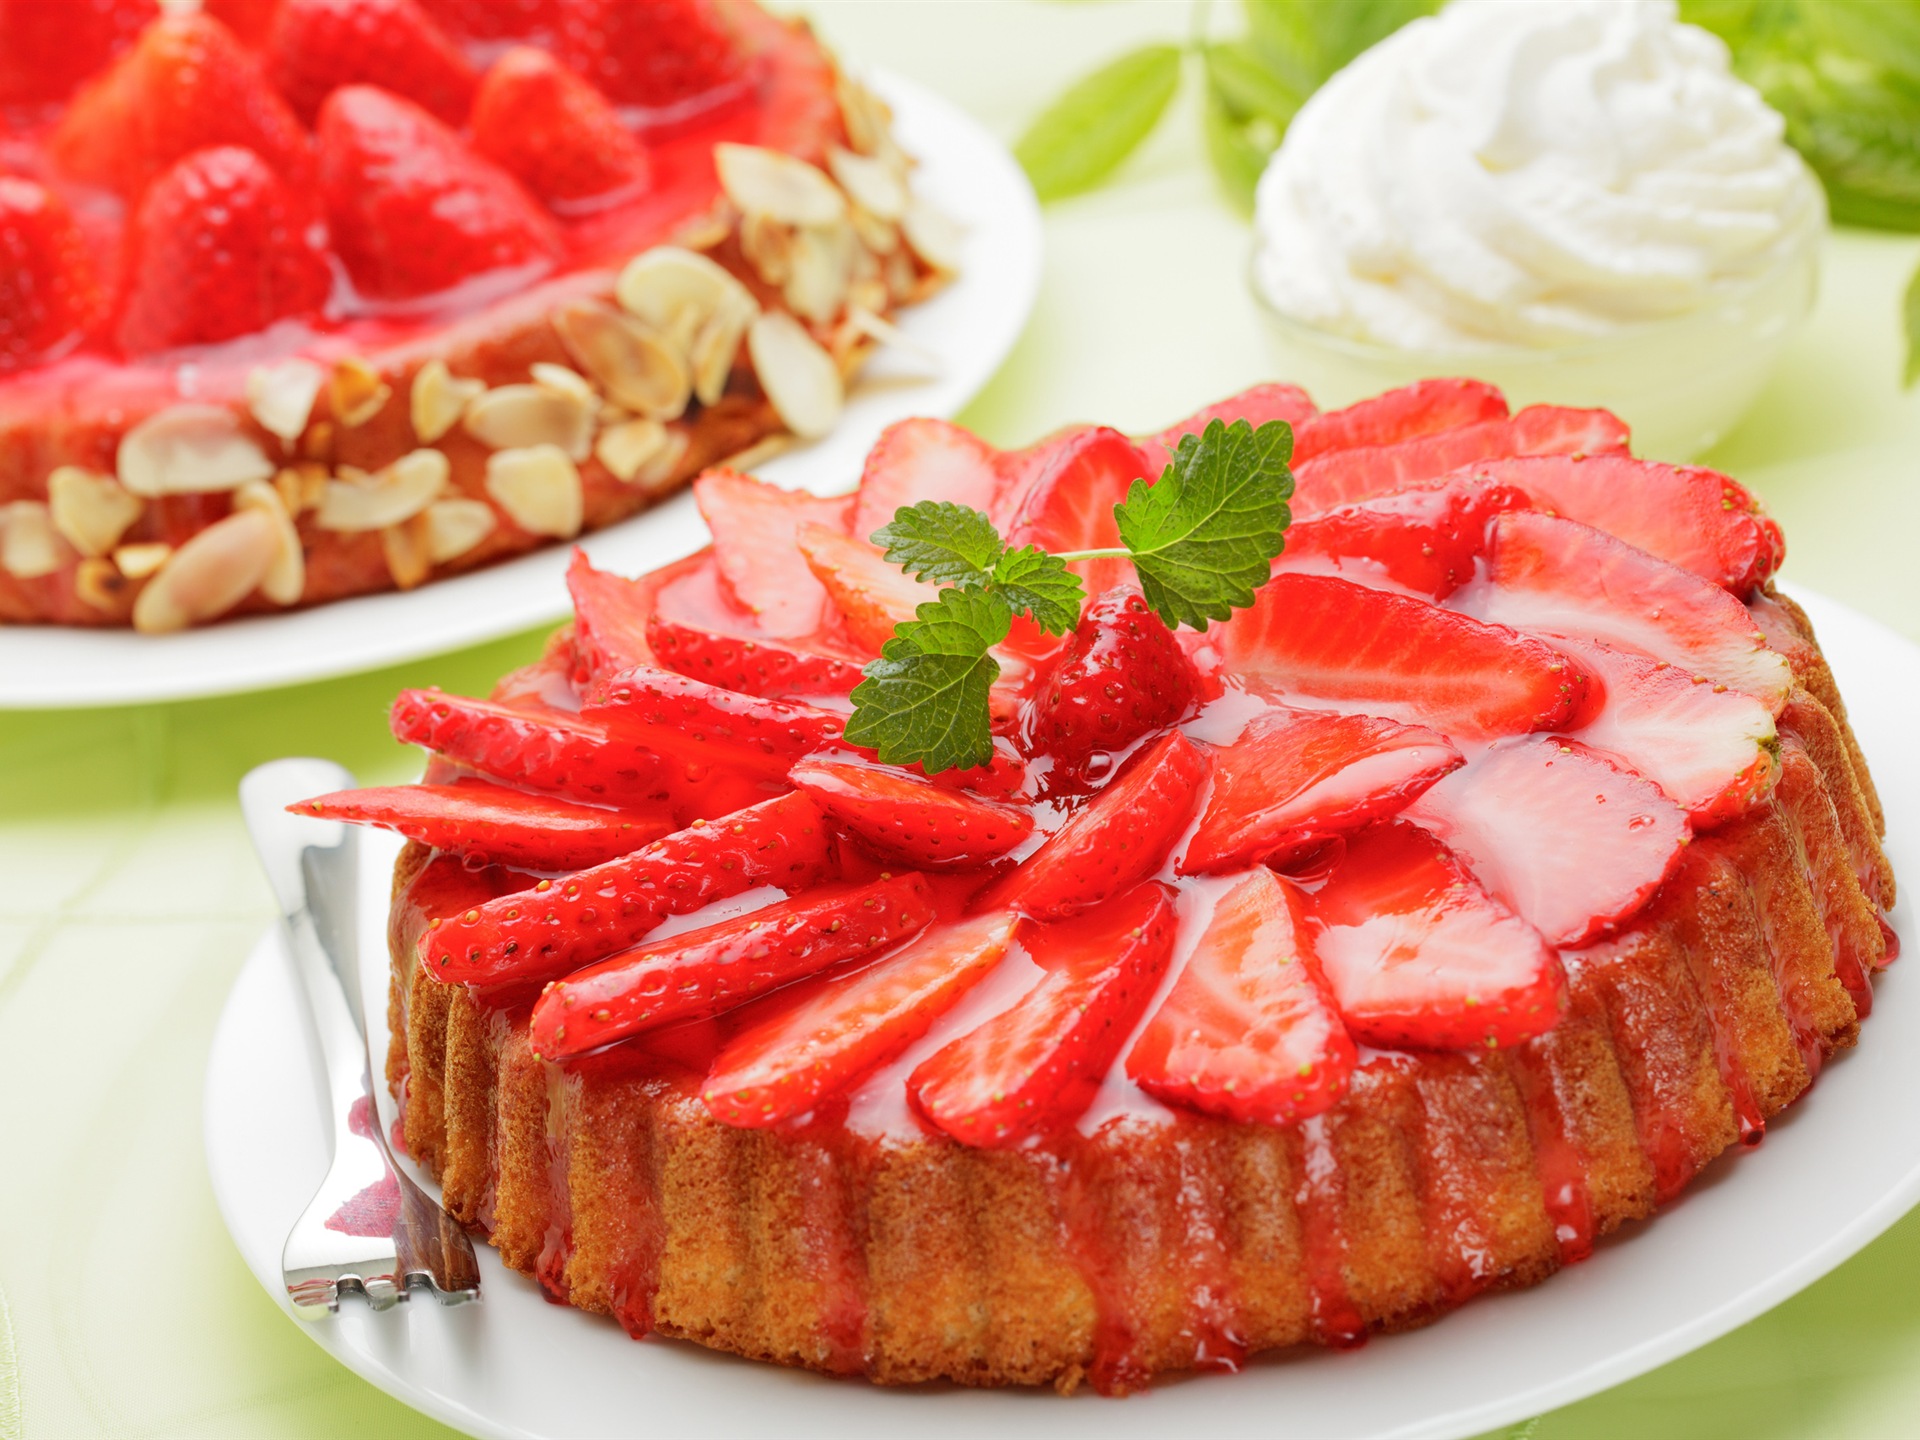 Delicious strawberry cake HD wallpapers #12 - 1920x1440